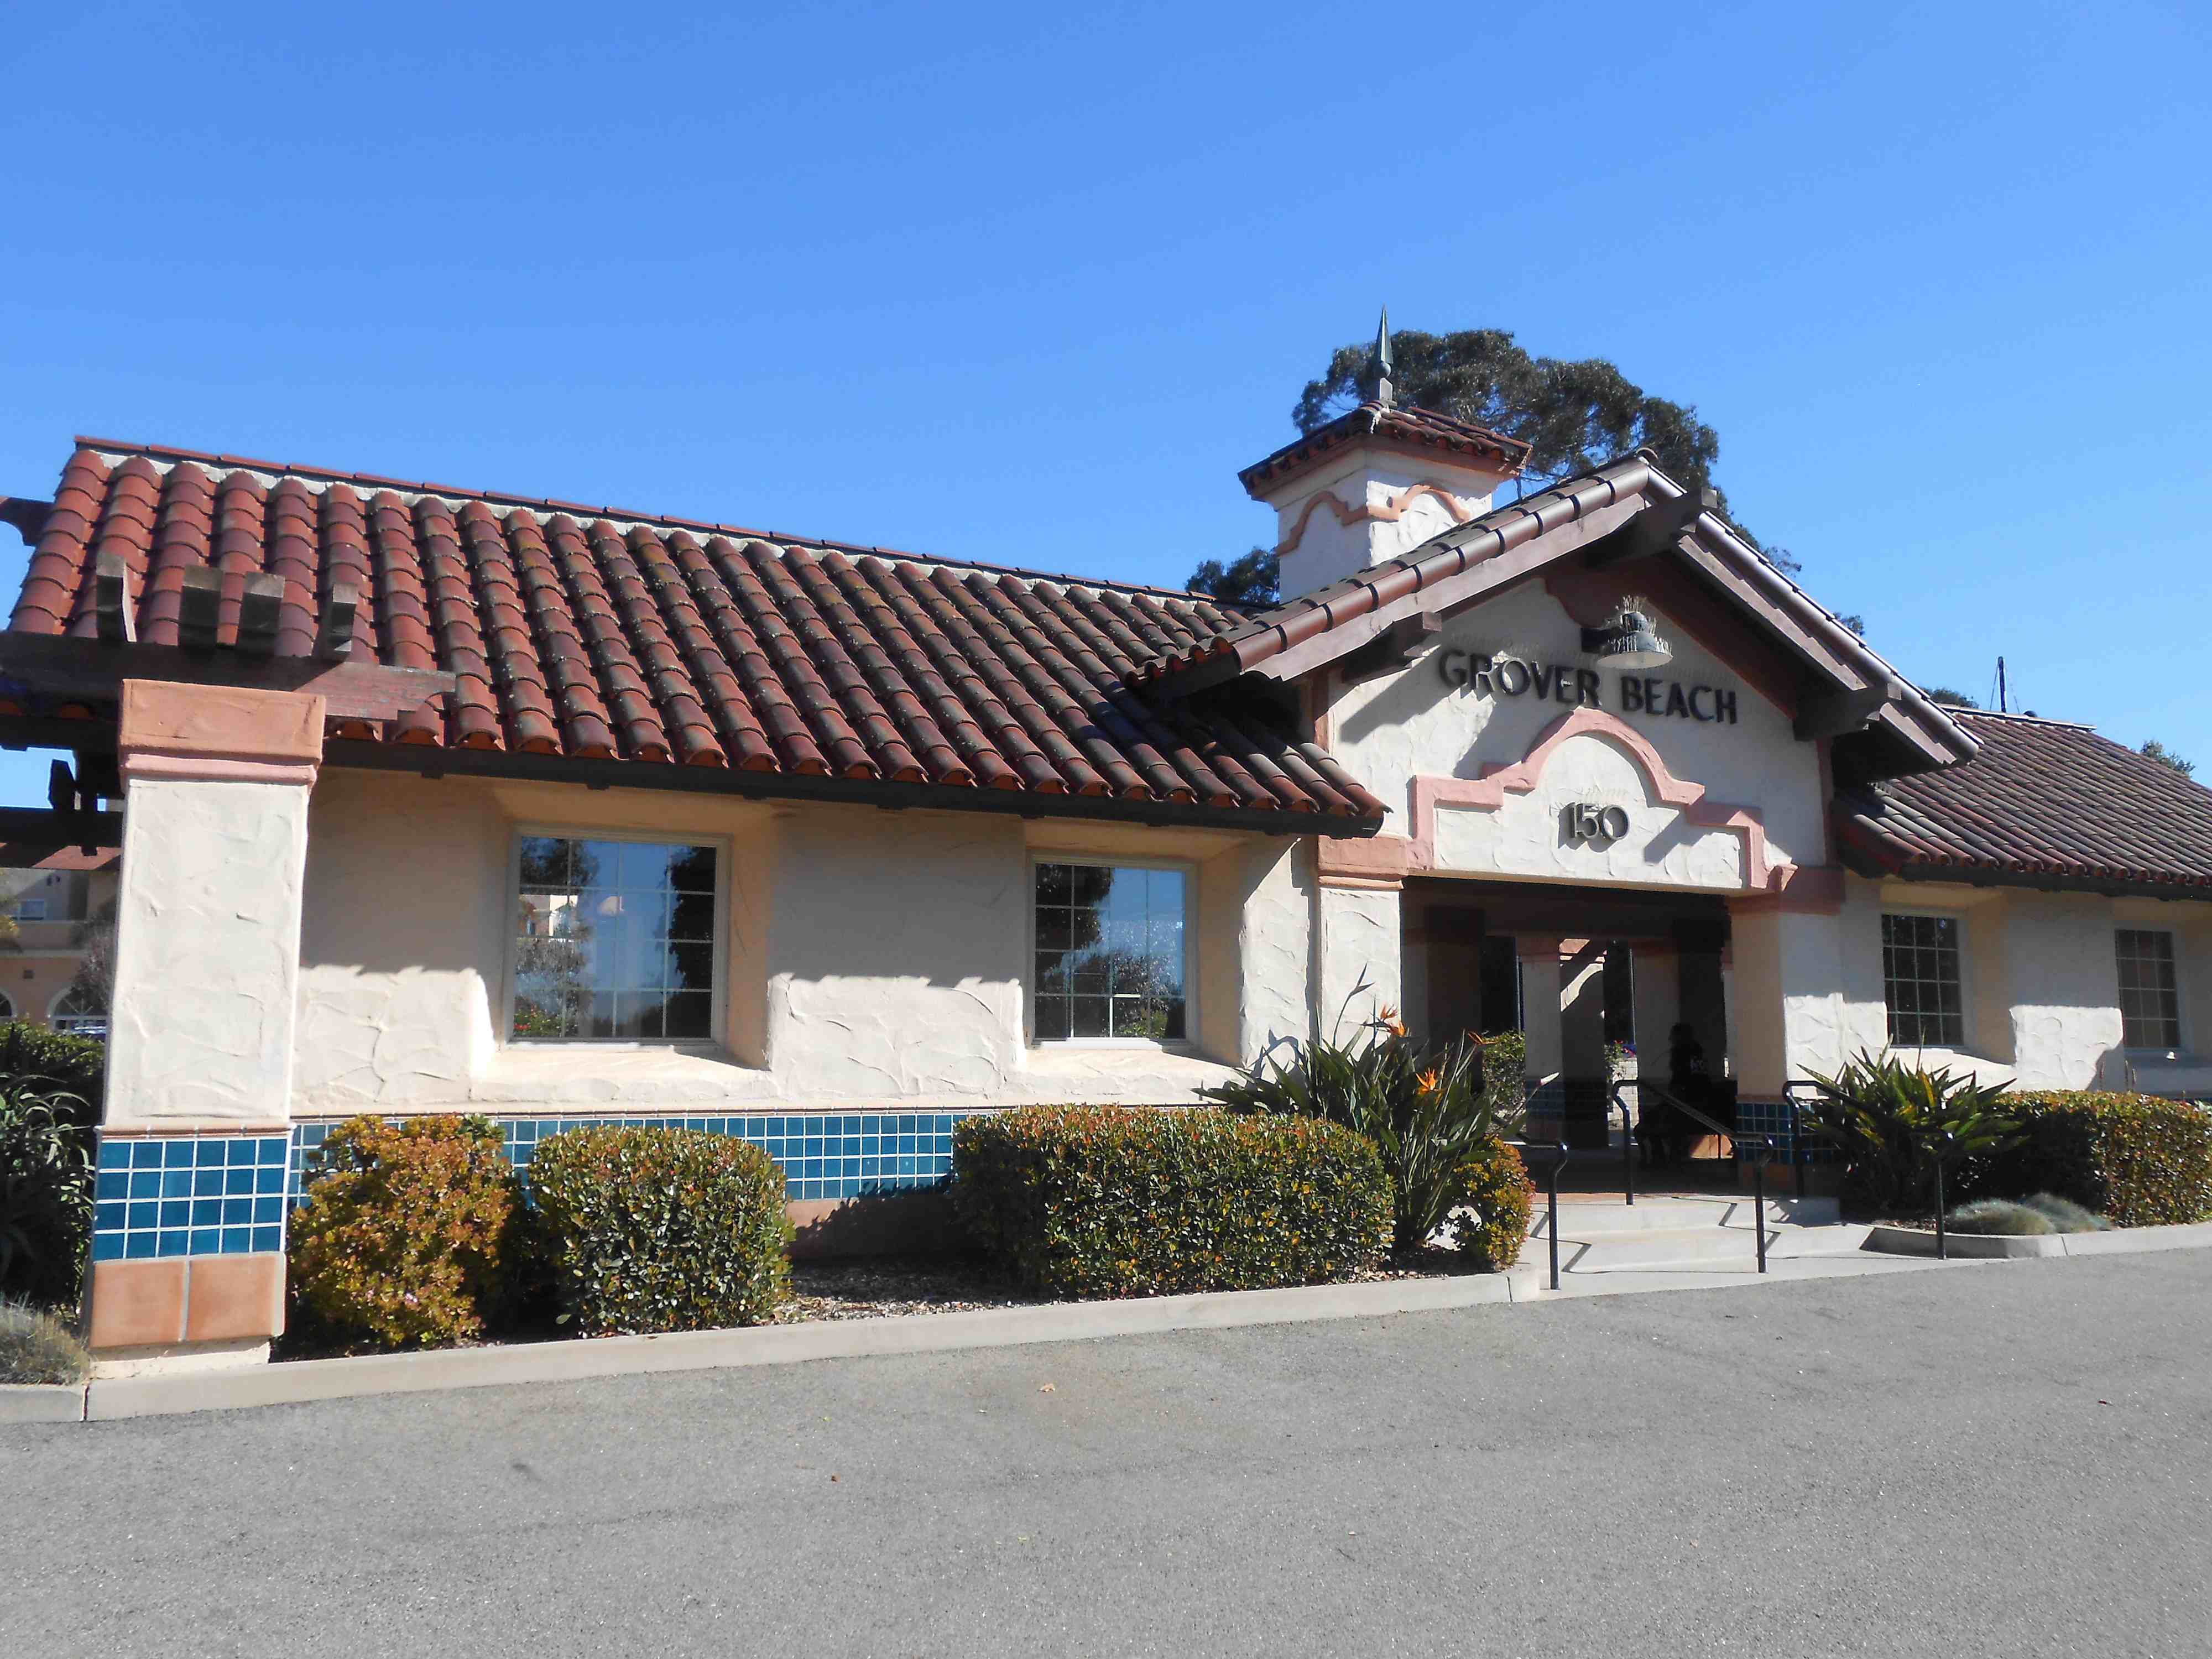 Amtrak Station in Grover Beach conveniently located 2 miles away